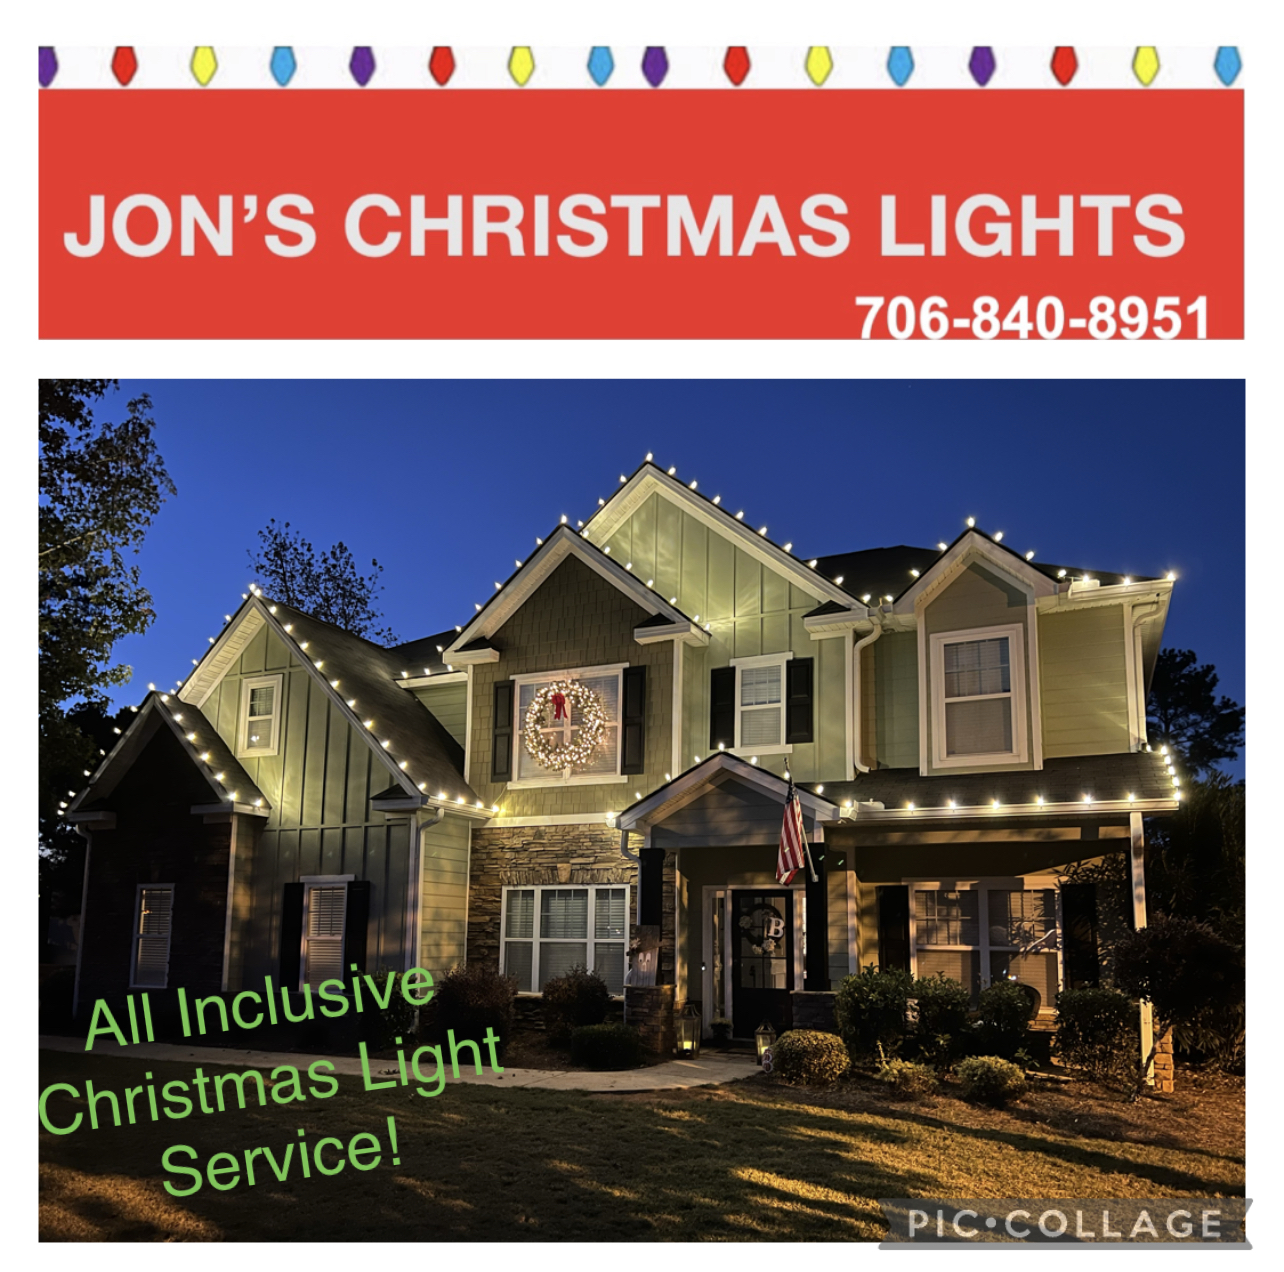 Christmas Light Installation Company Near Me Indianapolis In